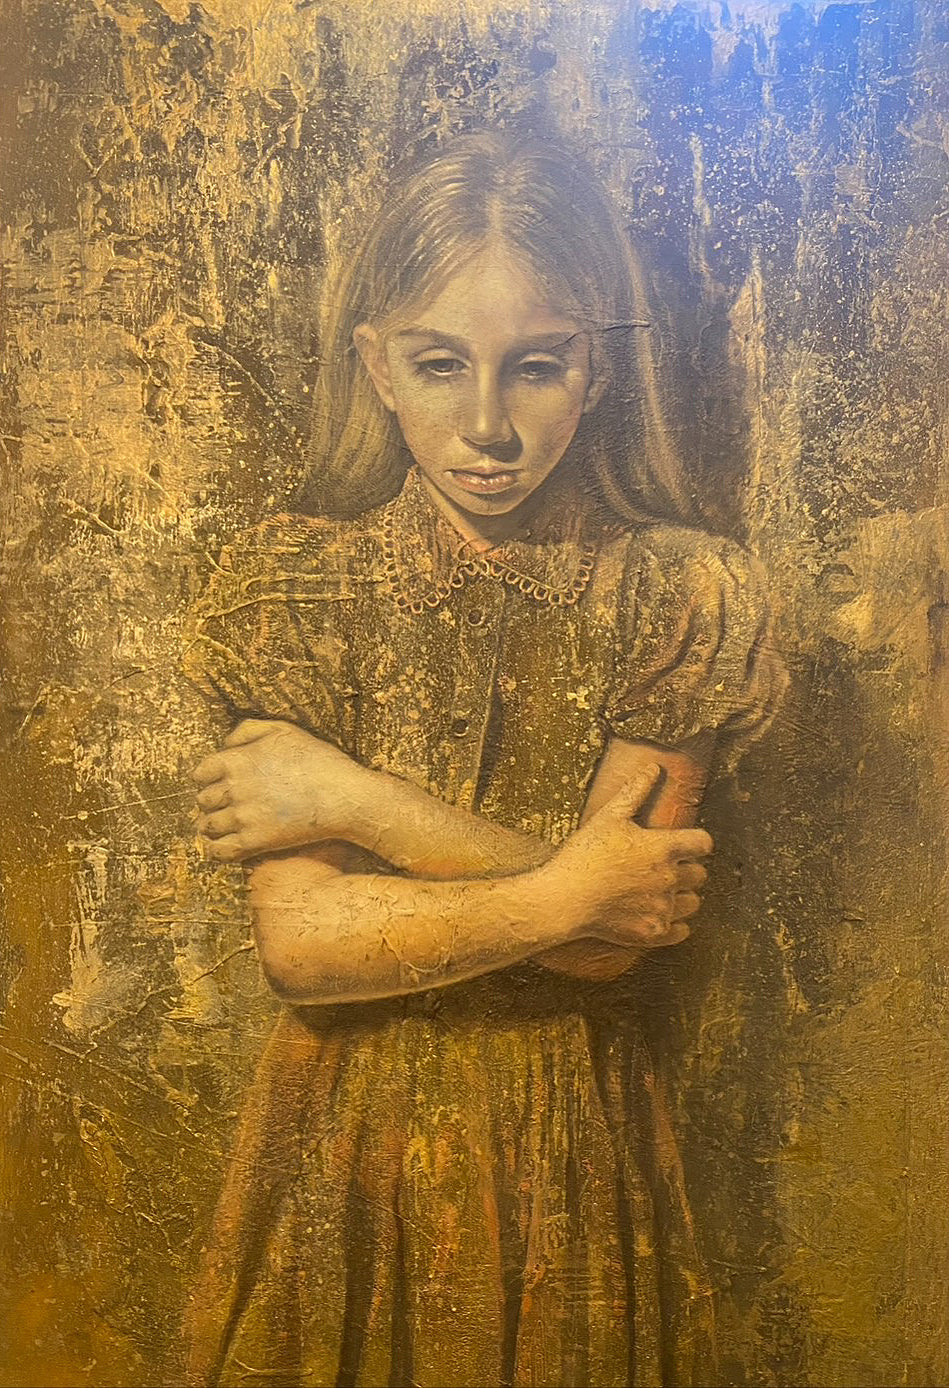 'Girl with the golden hair' Oil and mixed media on canvas 80cm x 120cm